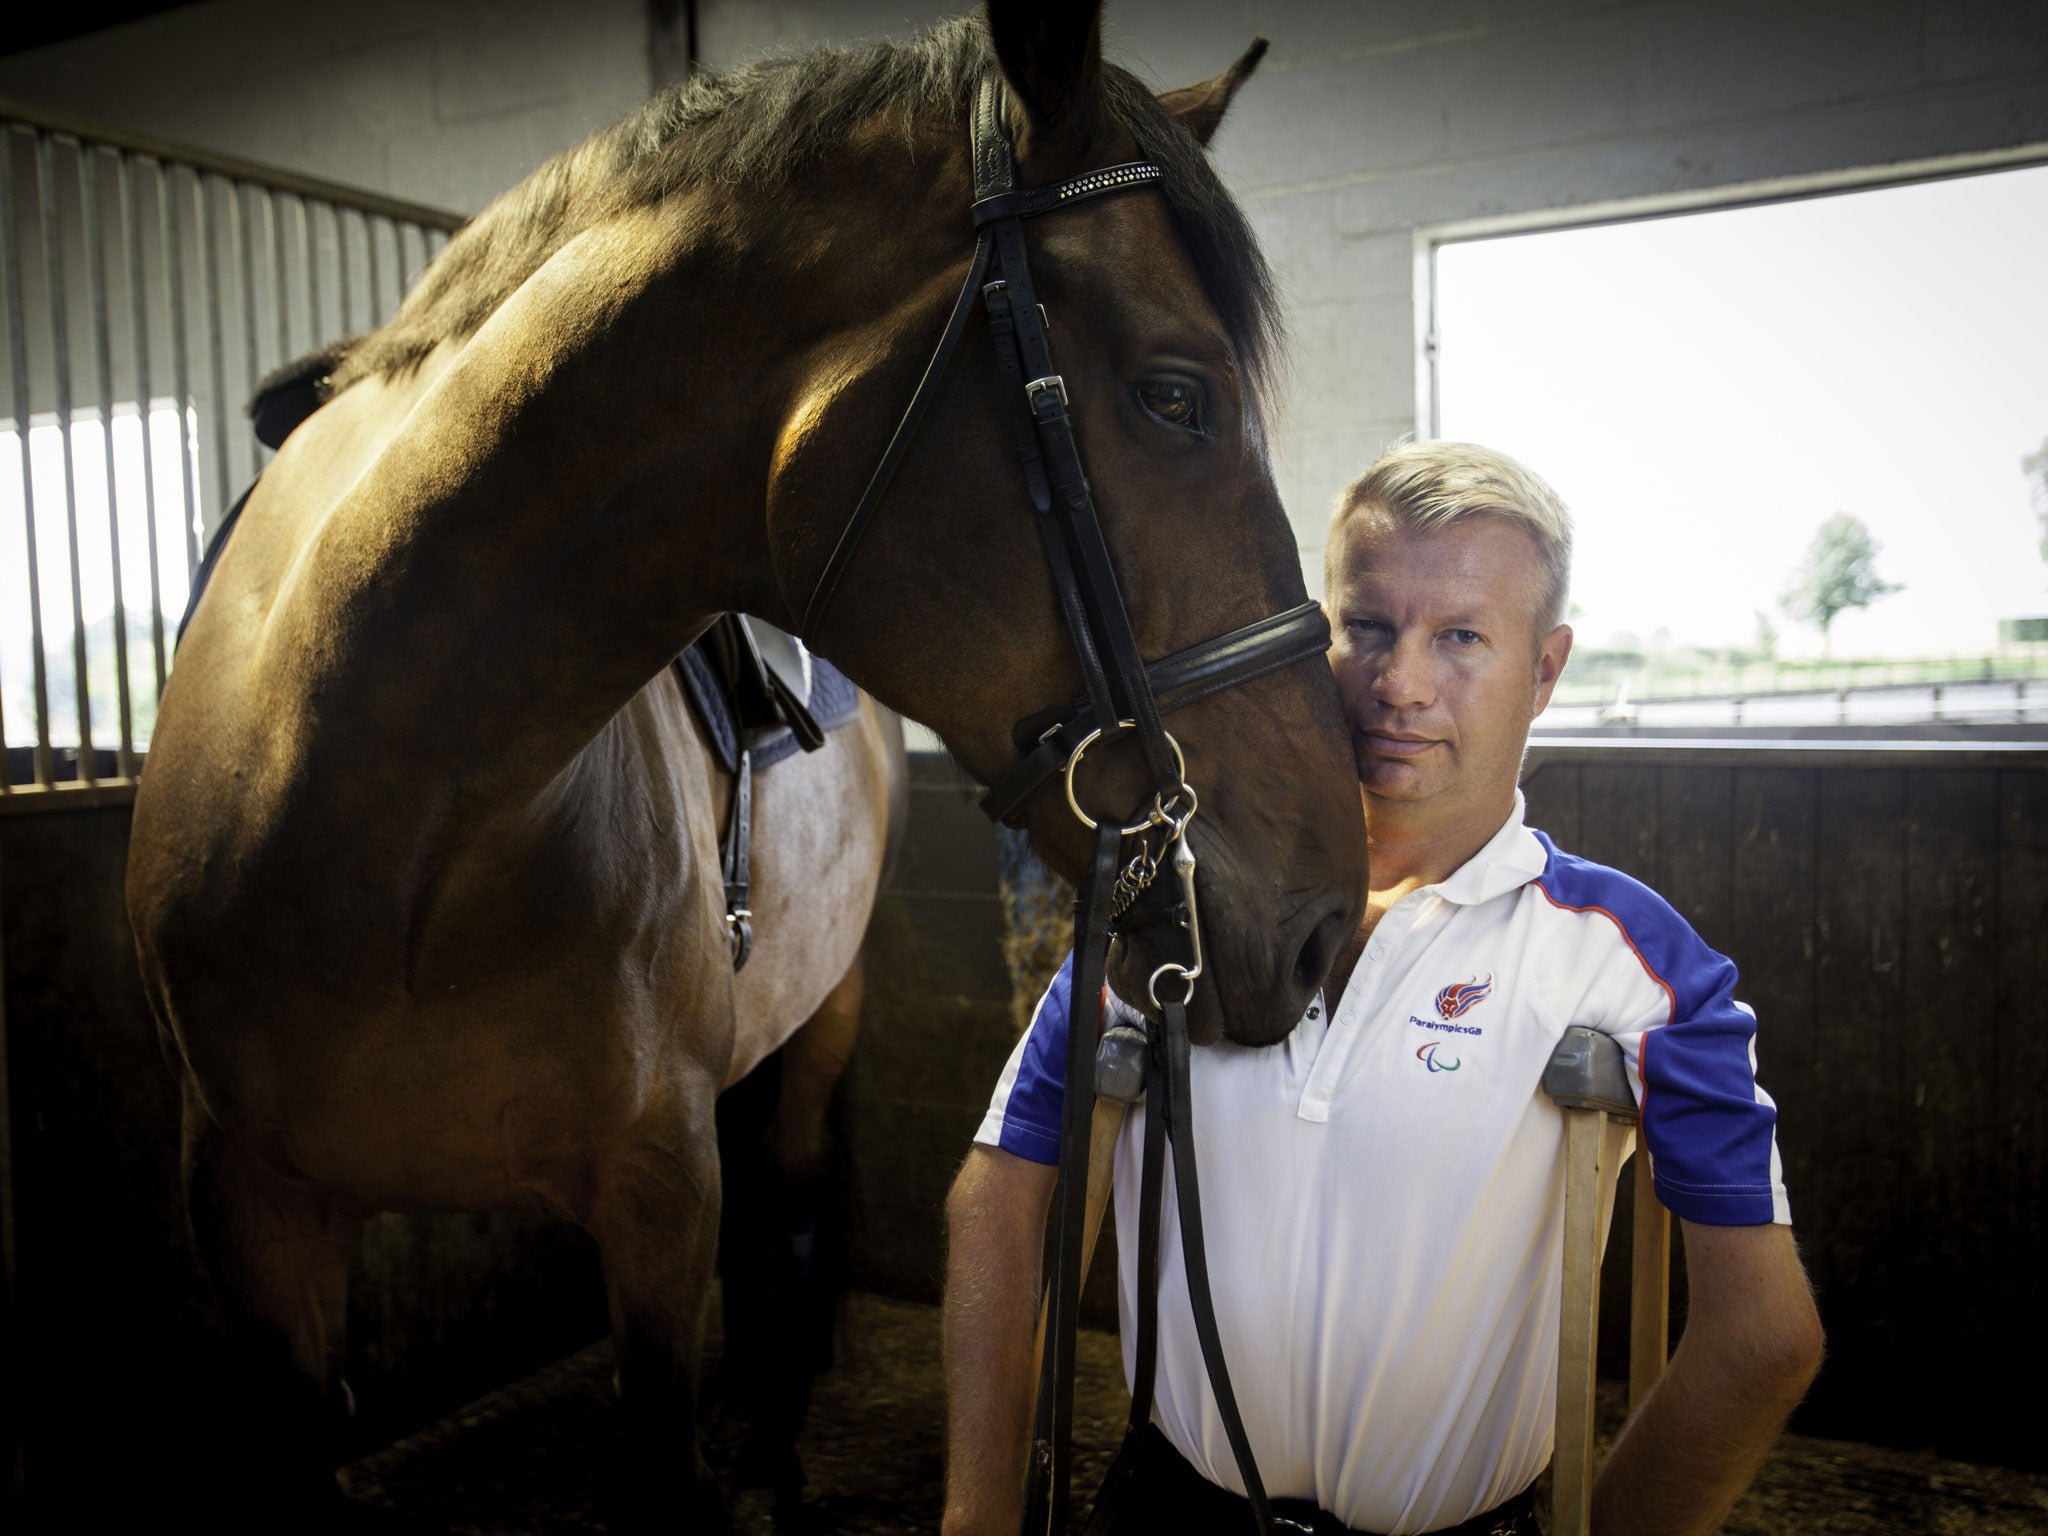 Paralympian dressage rider Lee Pearson, winner of 10 golds